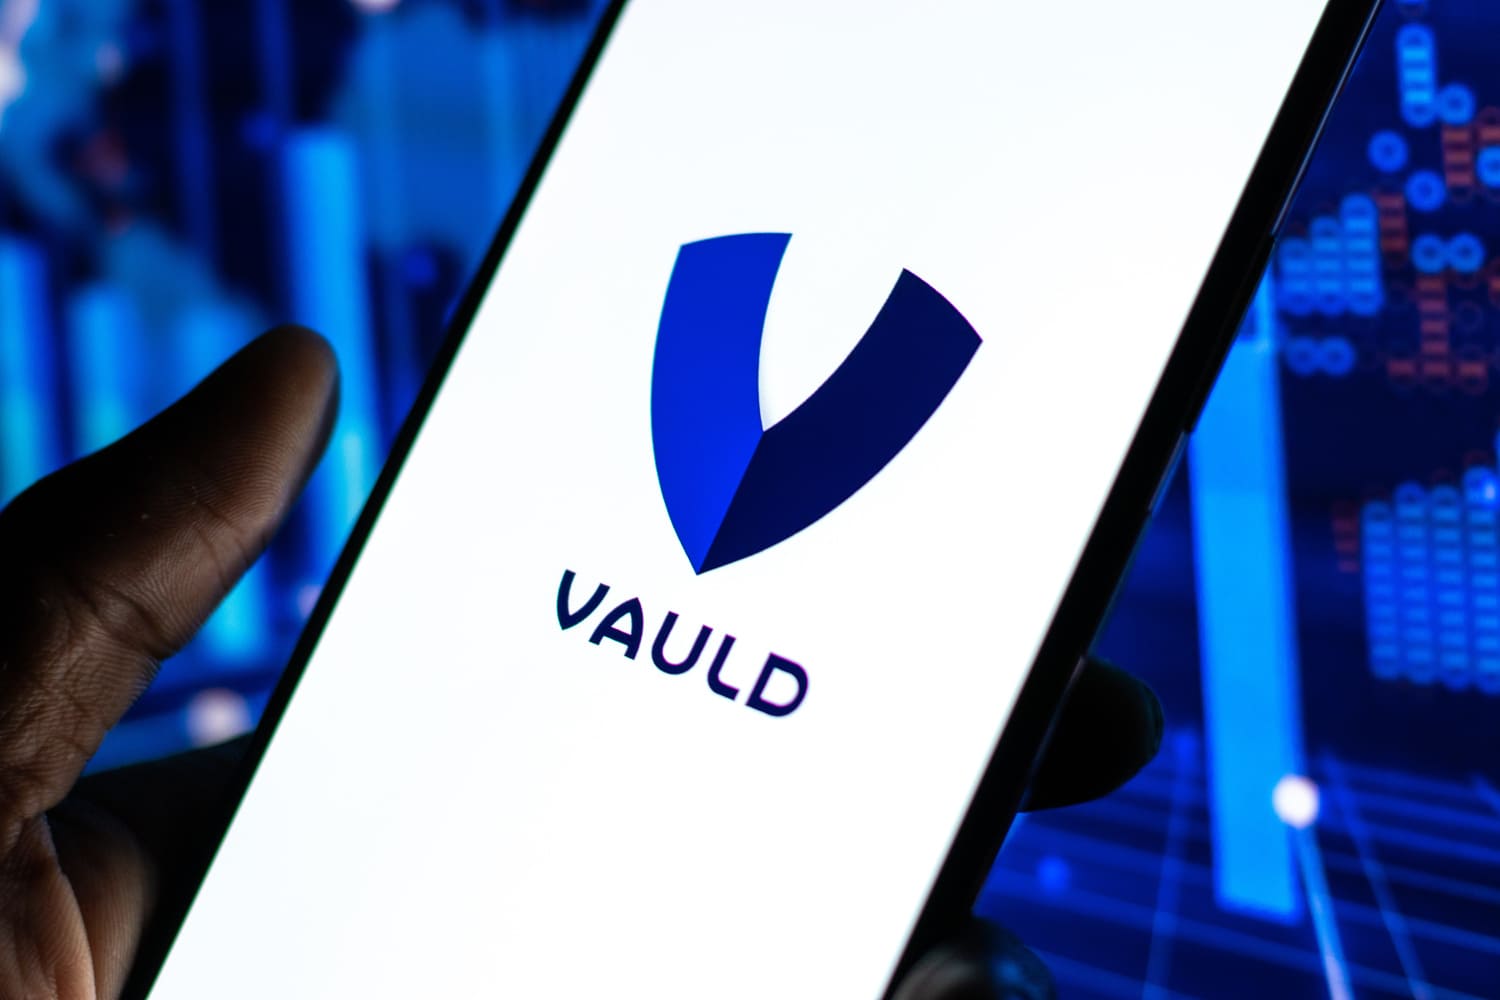 Cryptocurrency exchange Vauld files for bankruptcy